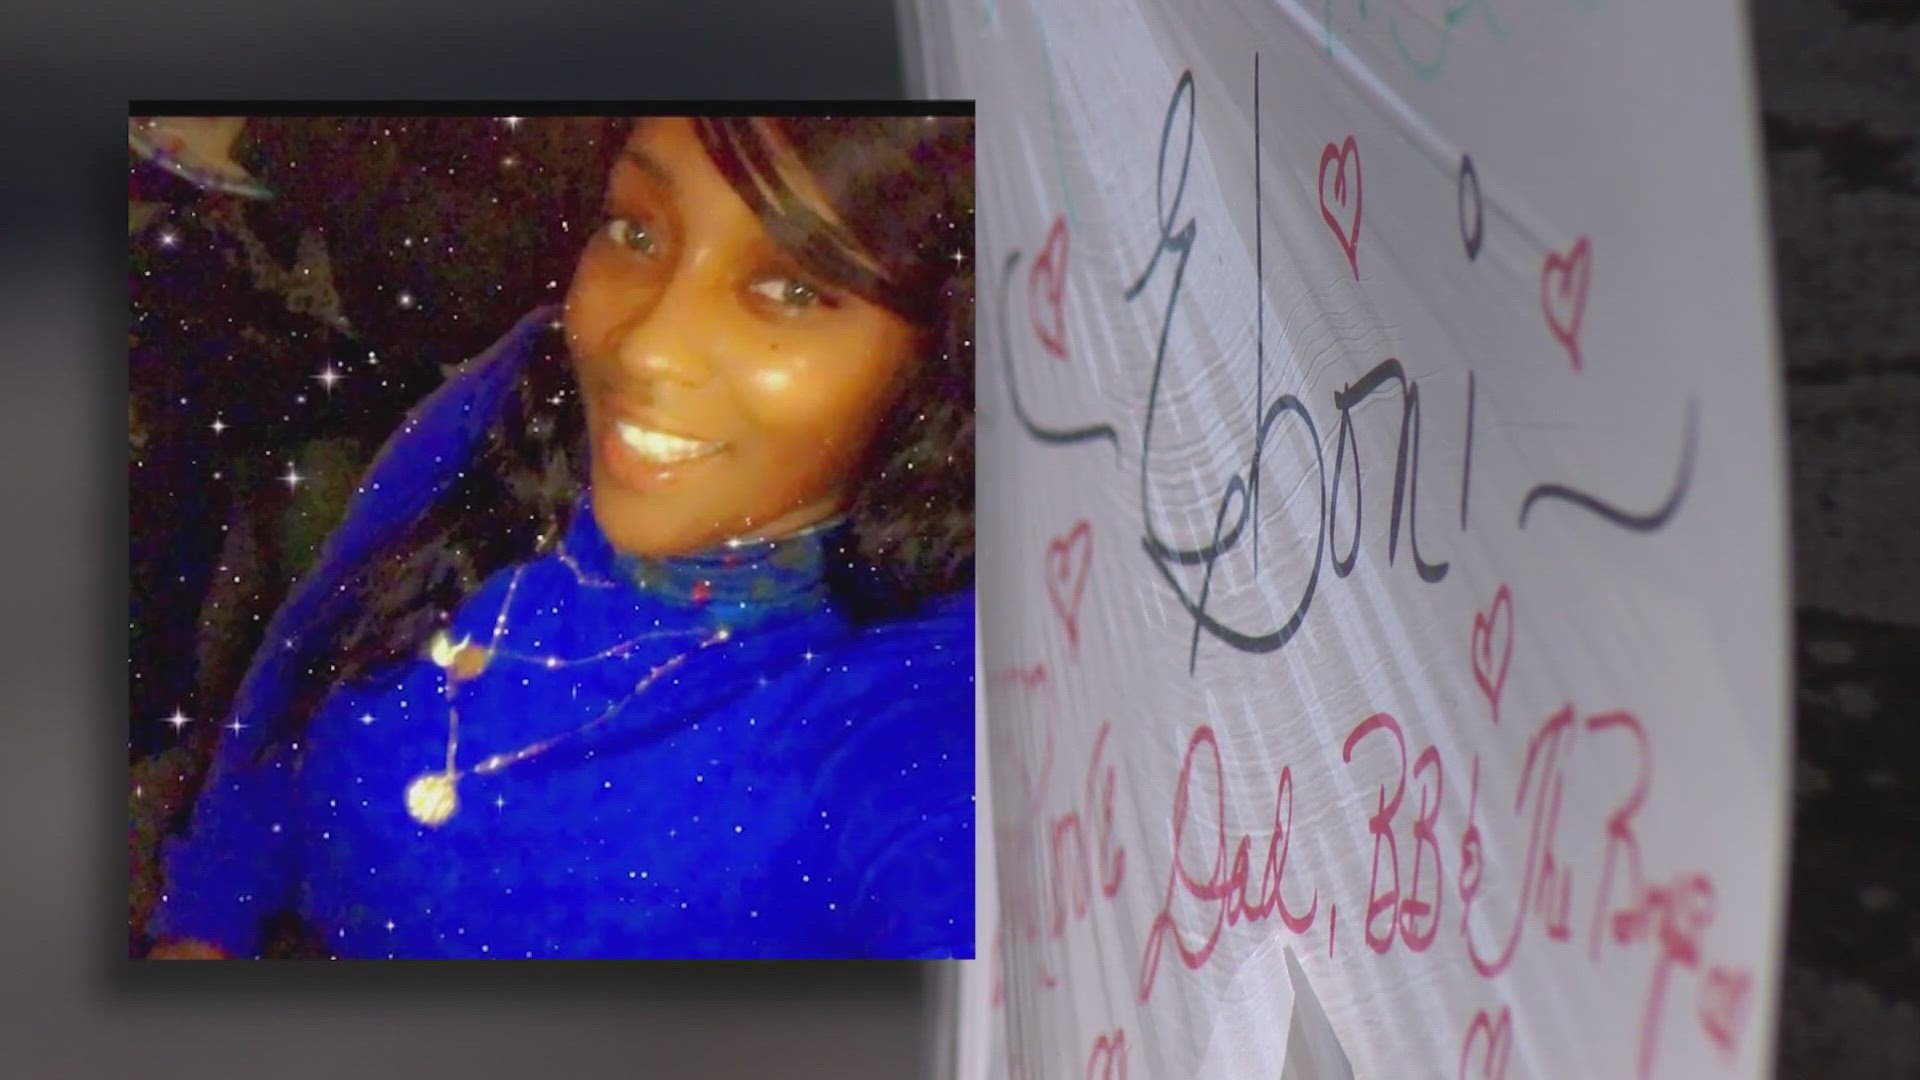 Eboni Walker was shot and killed last Wednesday. Her killer has not been caught.